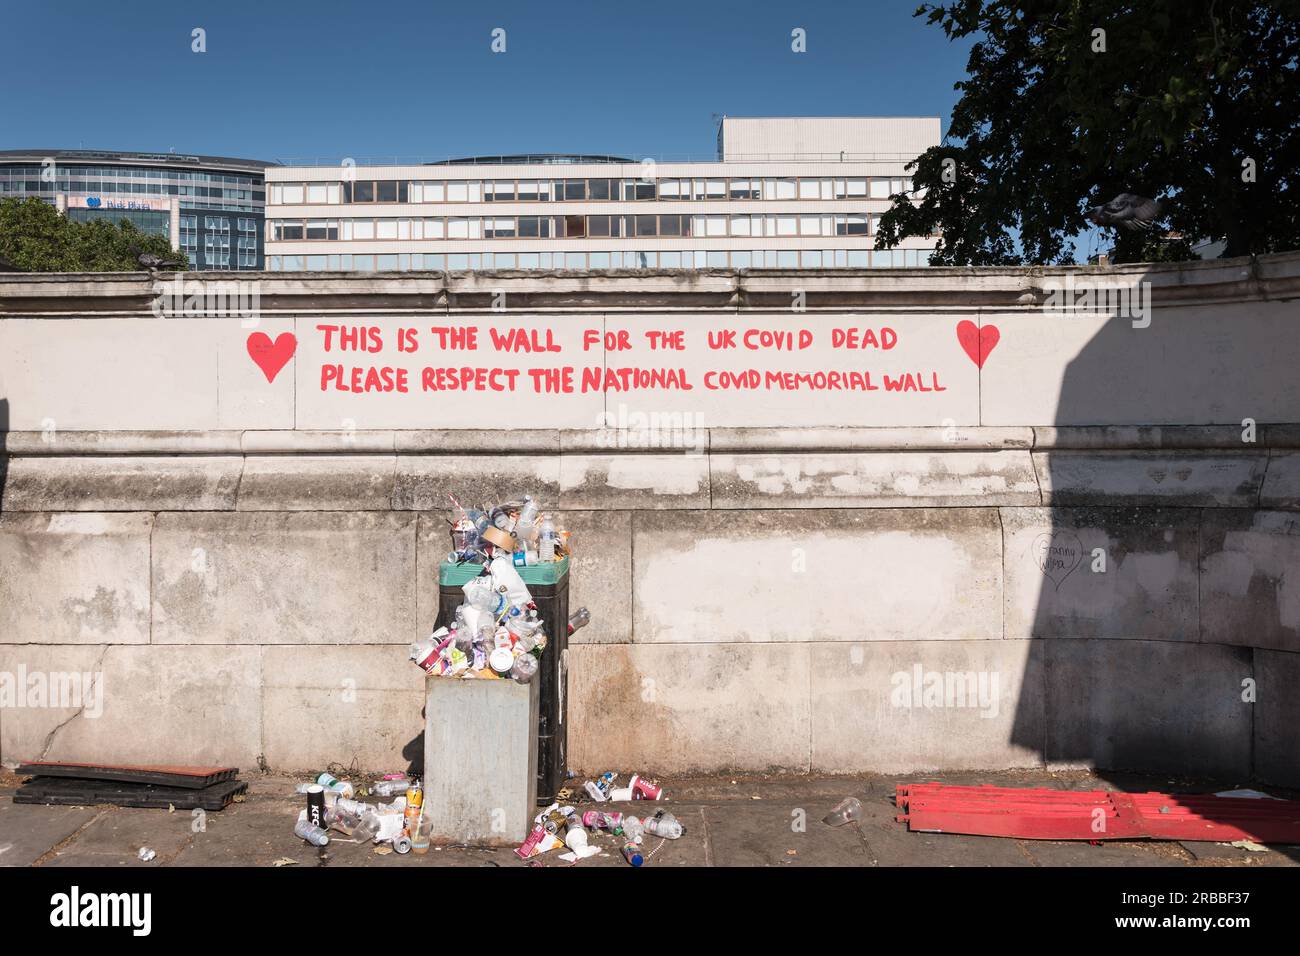 Red and Pink Hearts an der National Covid Memorial Wall, London, England, Großbritannien. Stockfoto